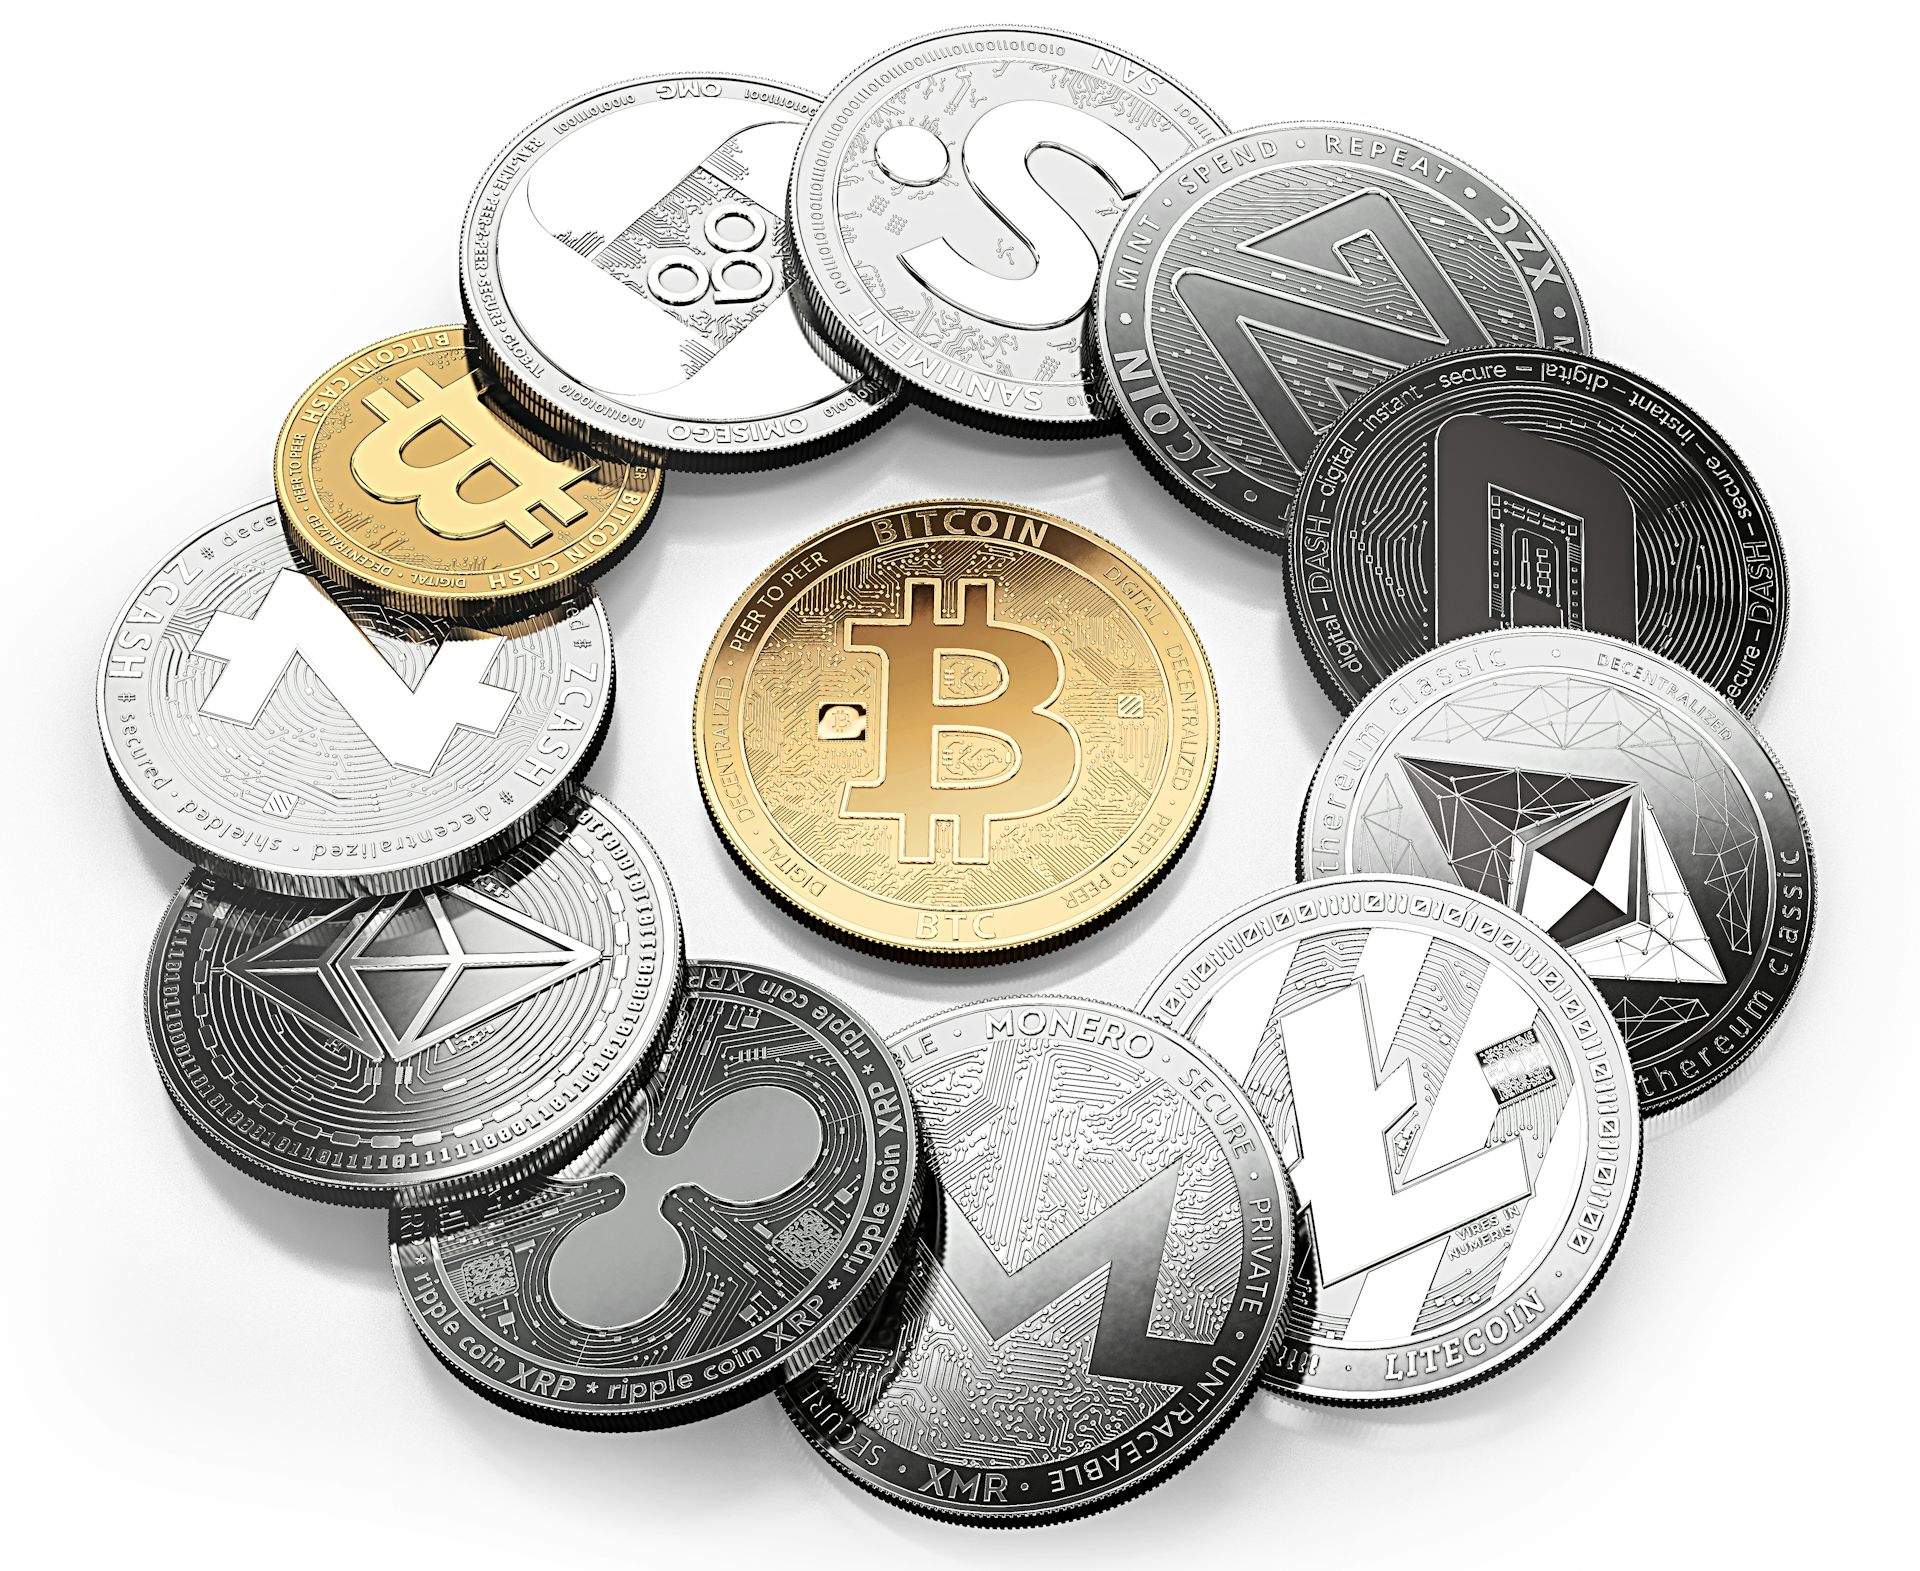 Beyond Bitcoin: Inside the insane world of altcoin cryptocurrencies - CNET